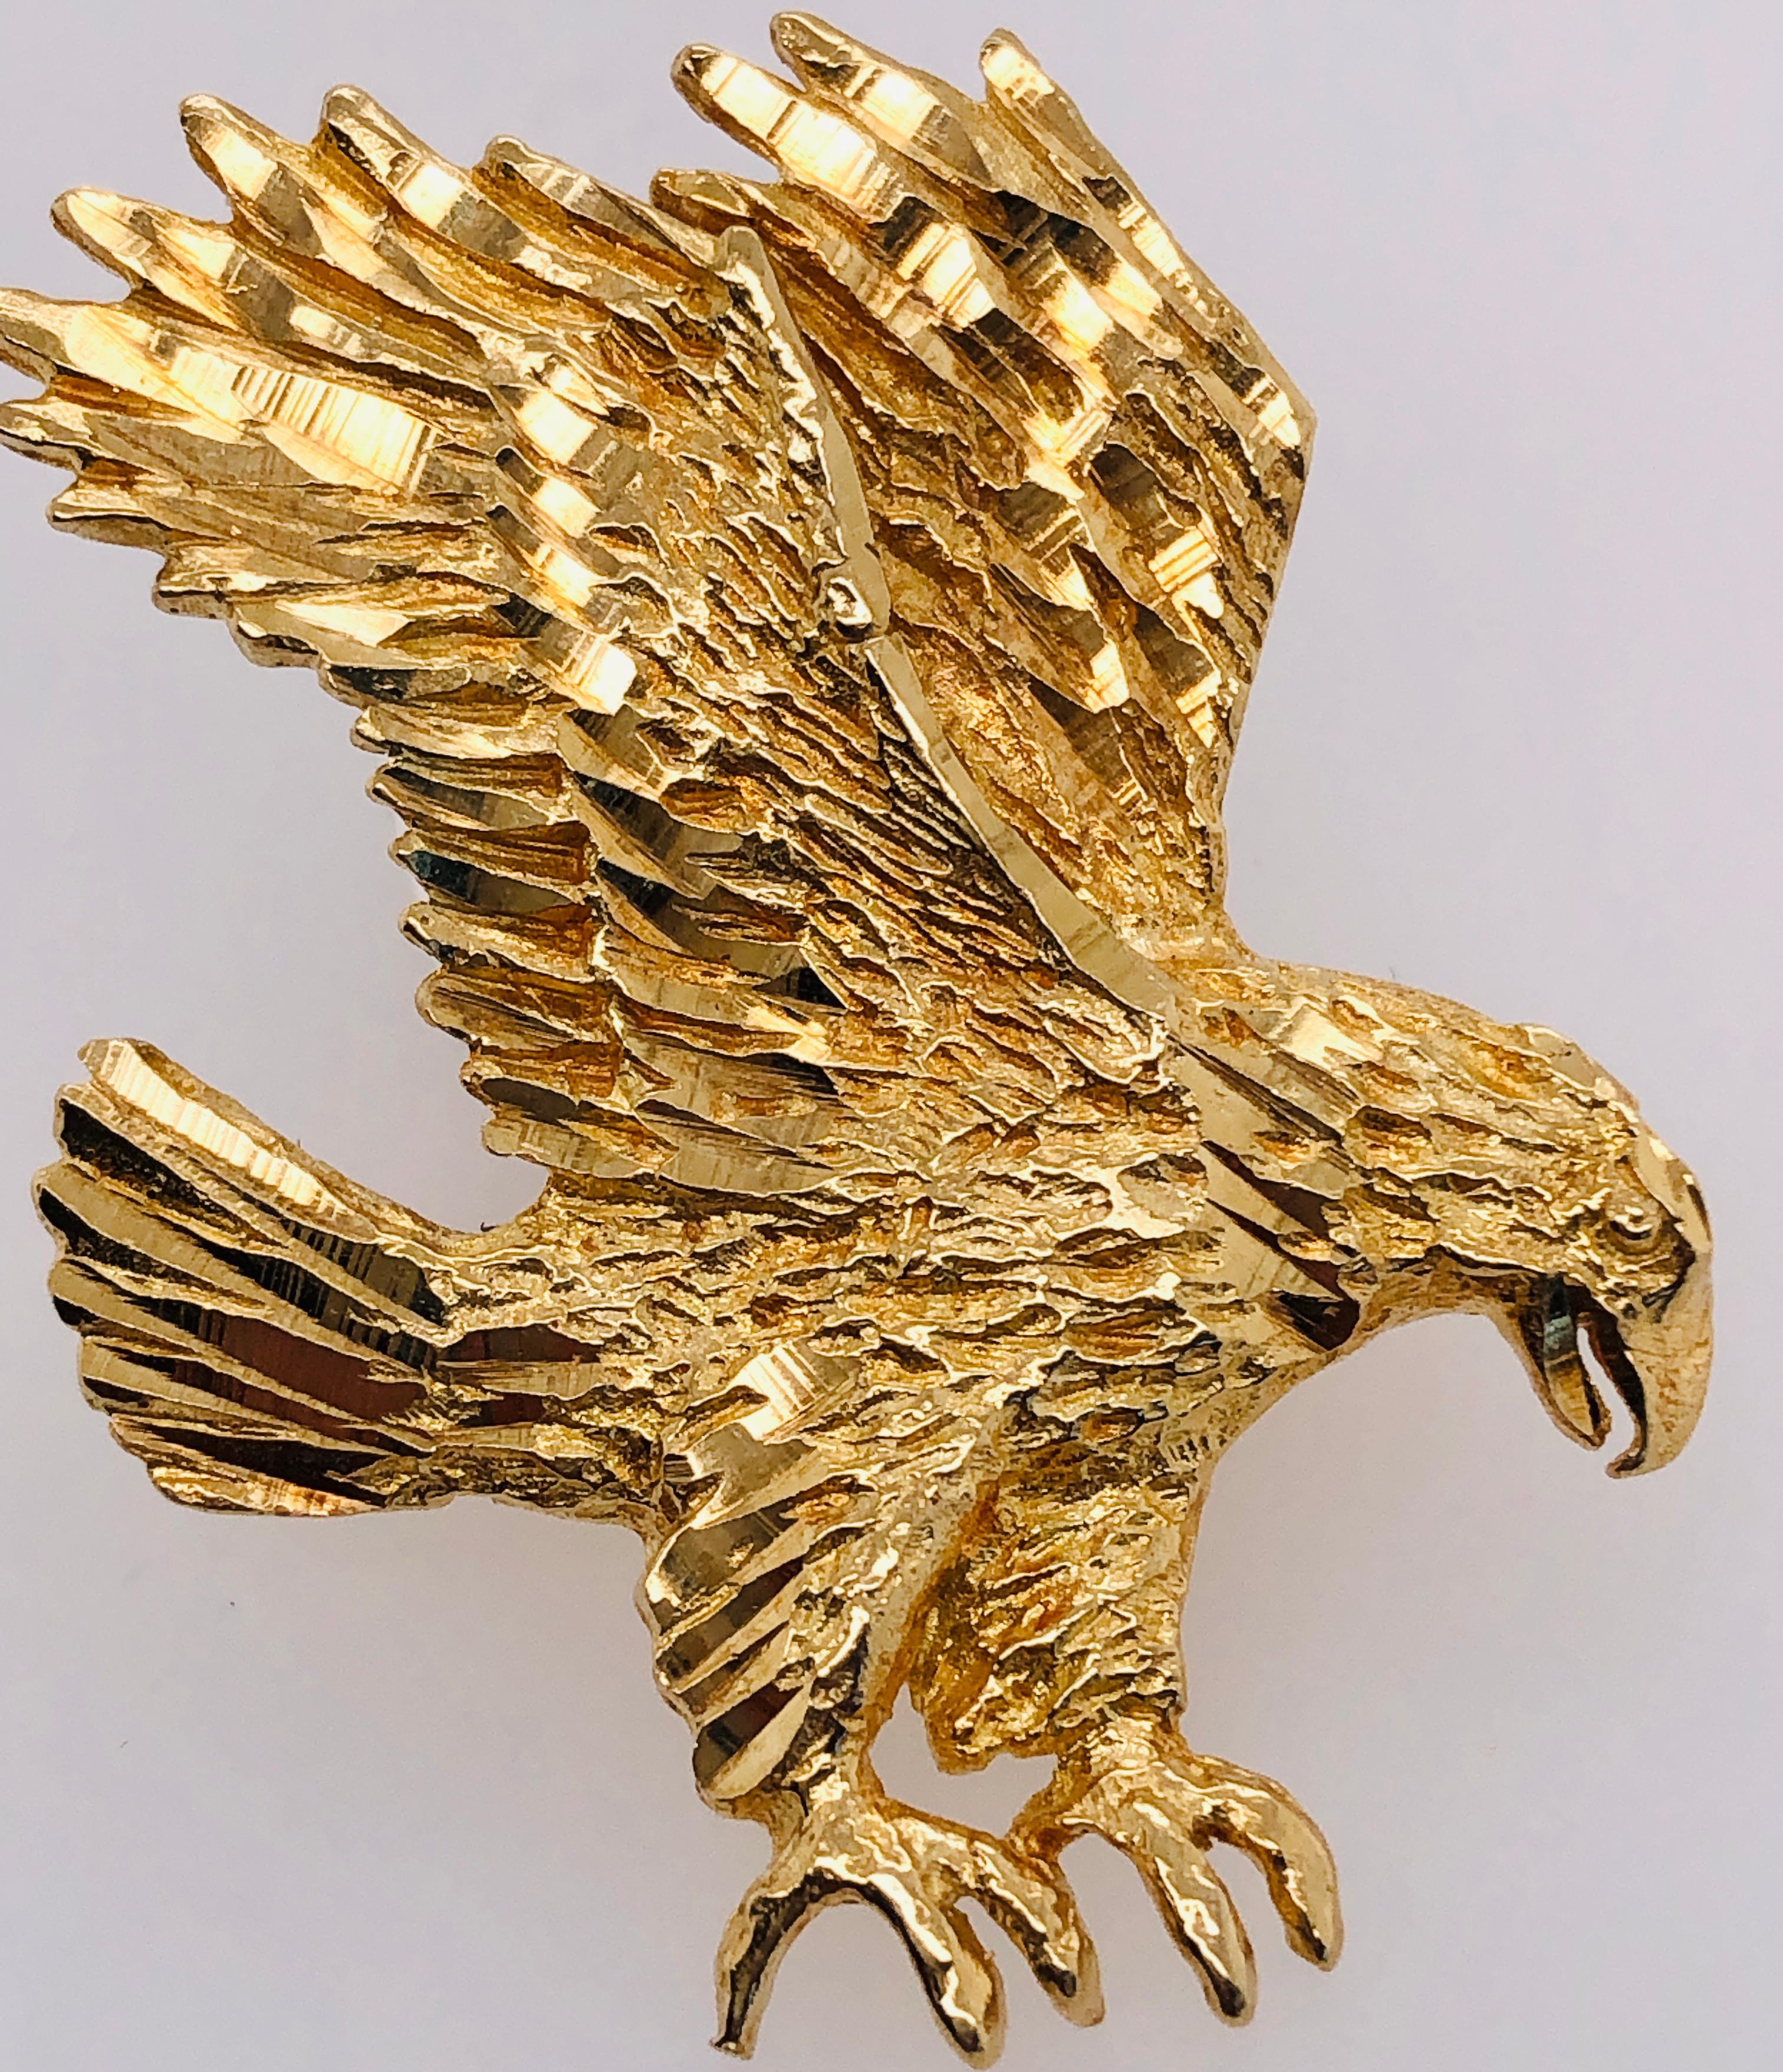 14 Kt Yellow Gold Eagle Charm Pendant
6.17 grams Total weight